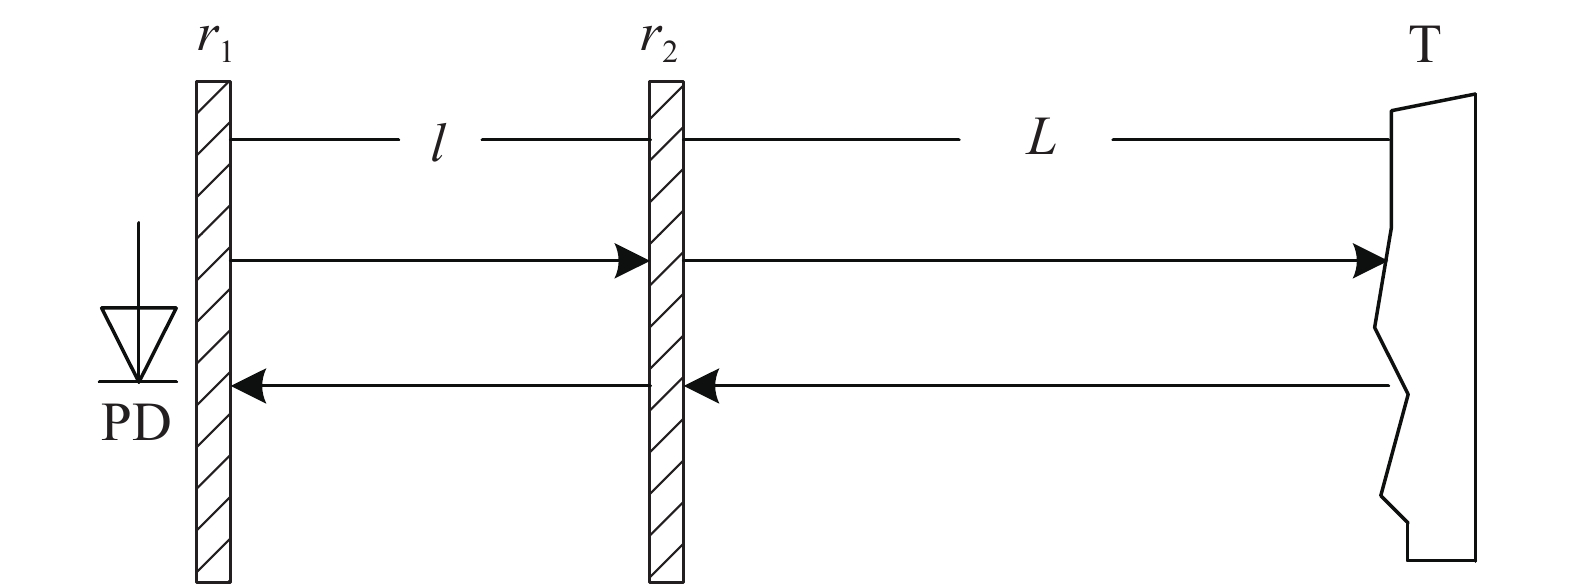 Theoretical model of laser feedback speckle interference